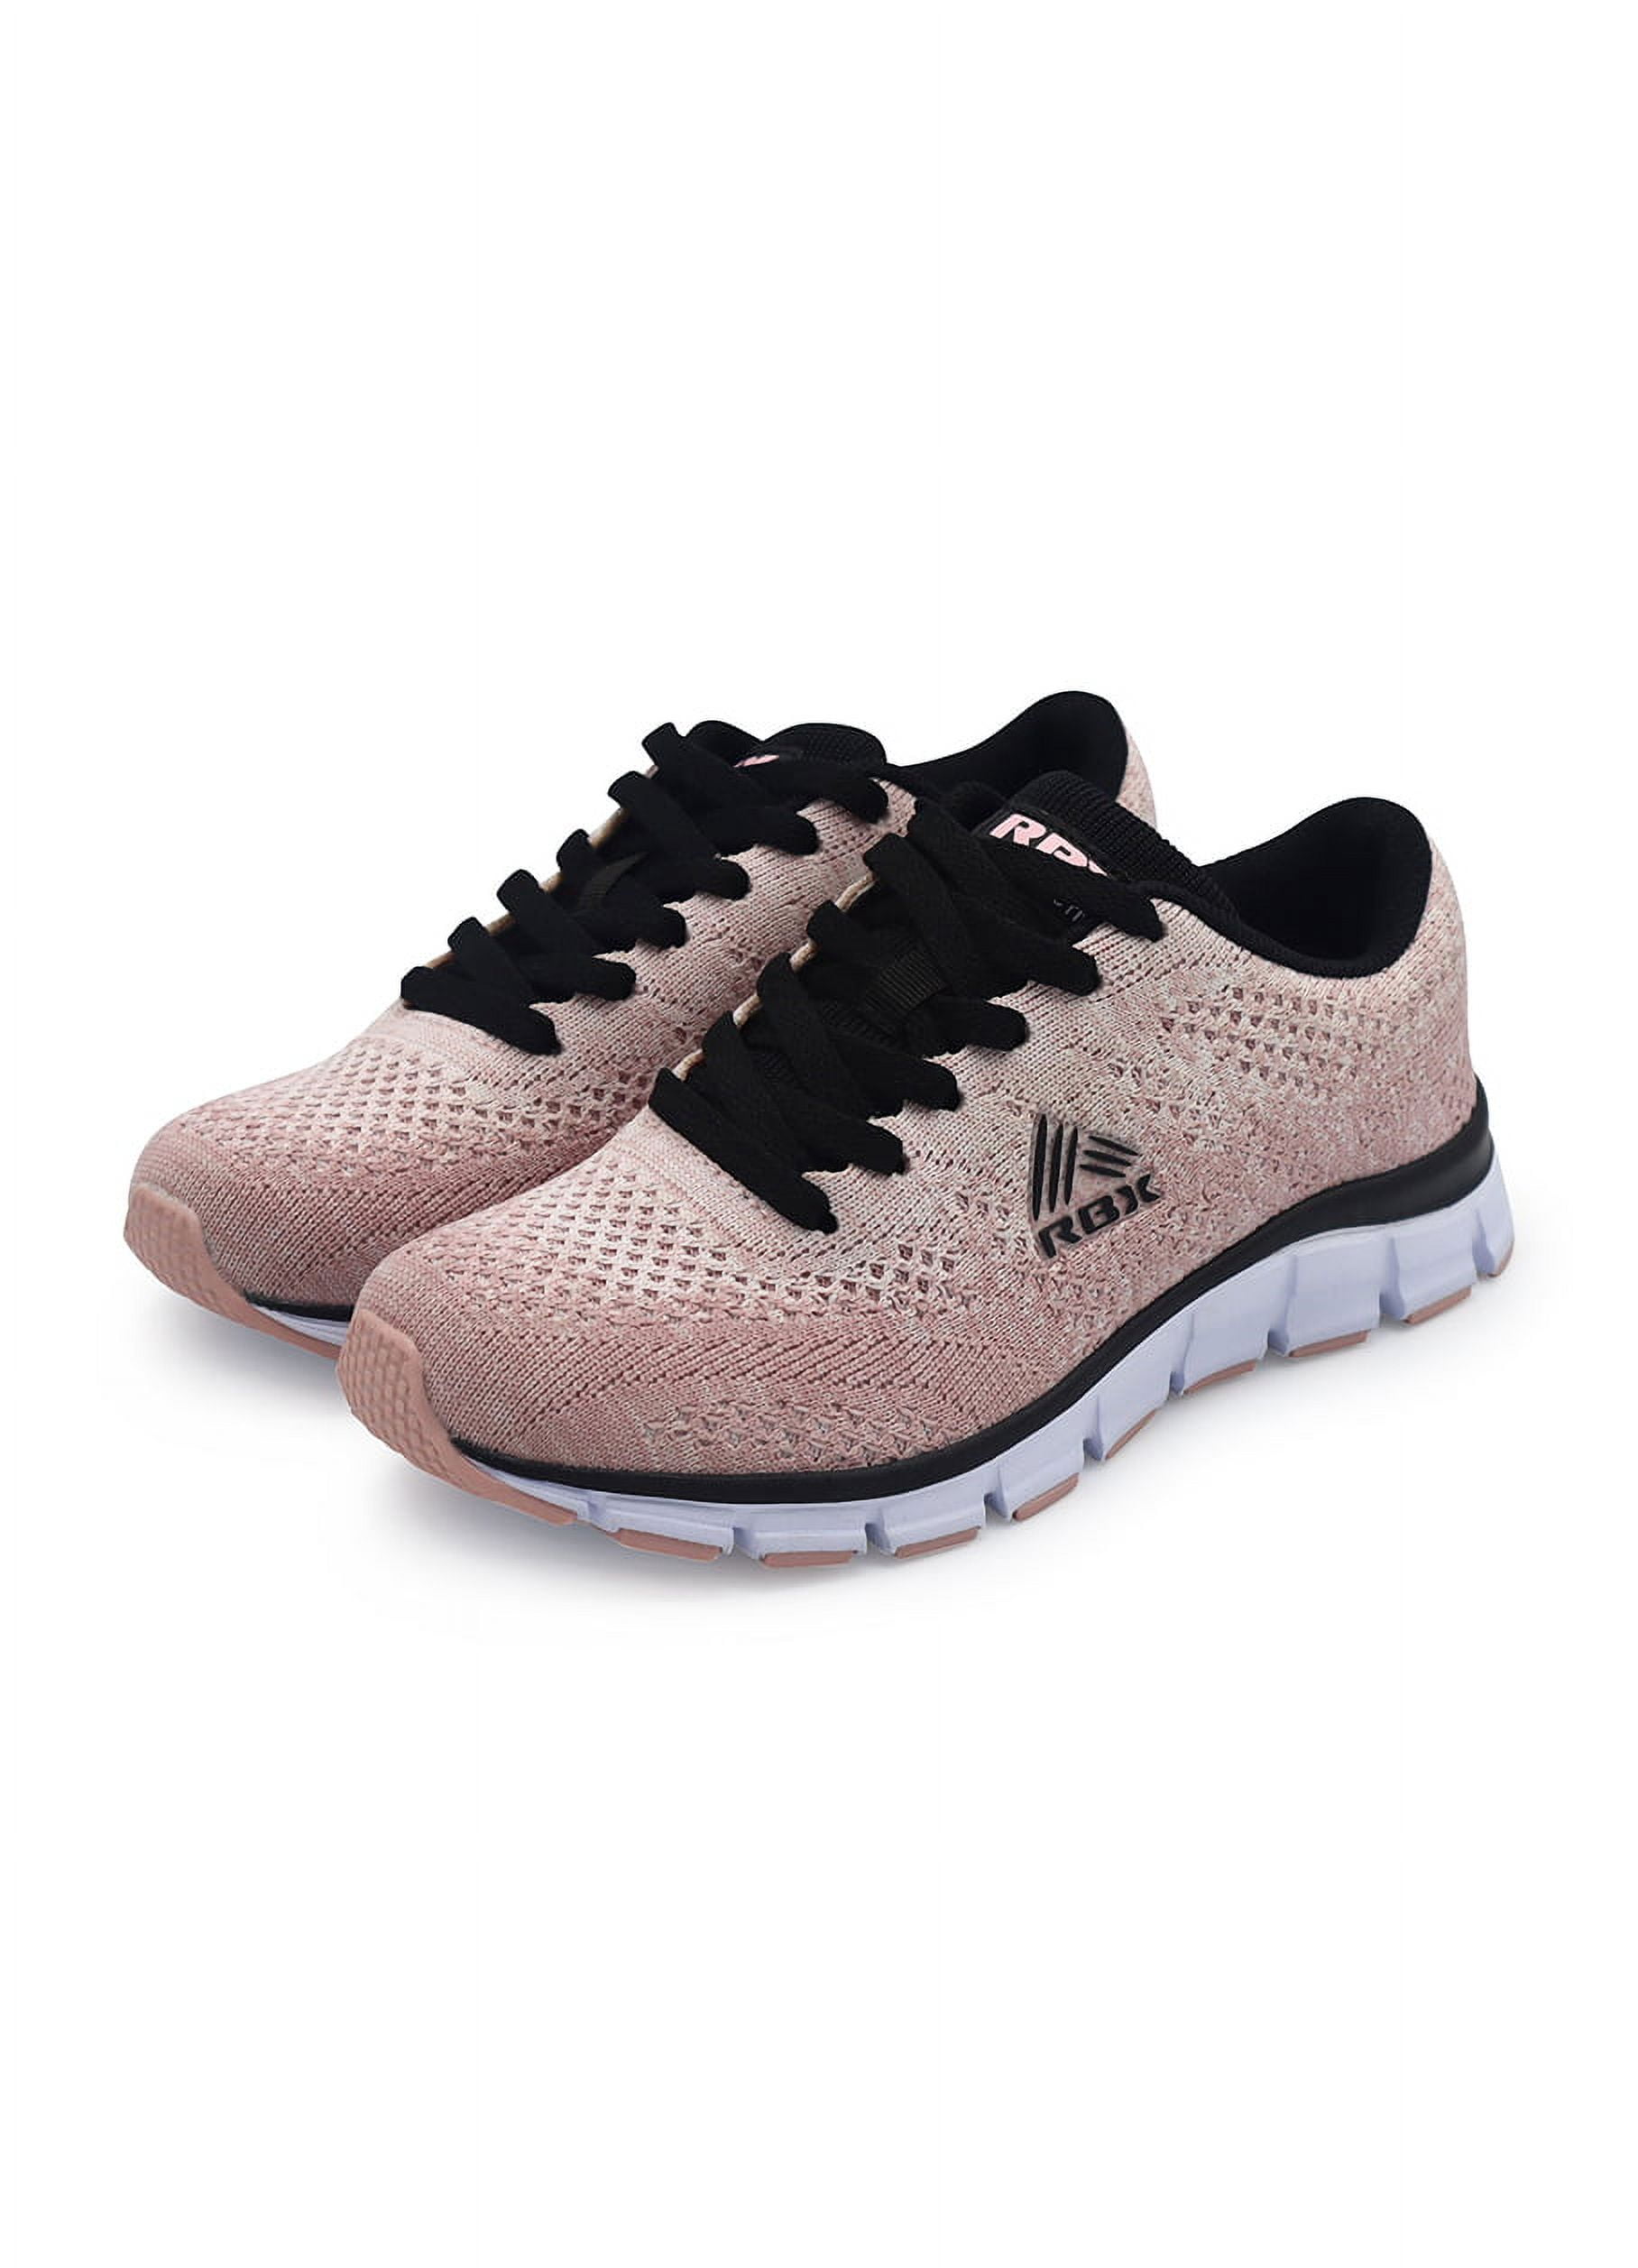 RBX Active Women's Lightweight Knit Lace Up Treaded Running Shoe ...